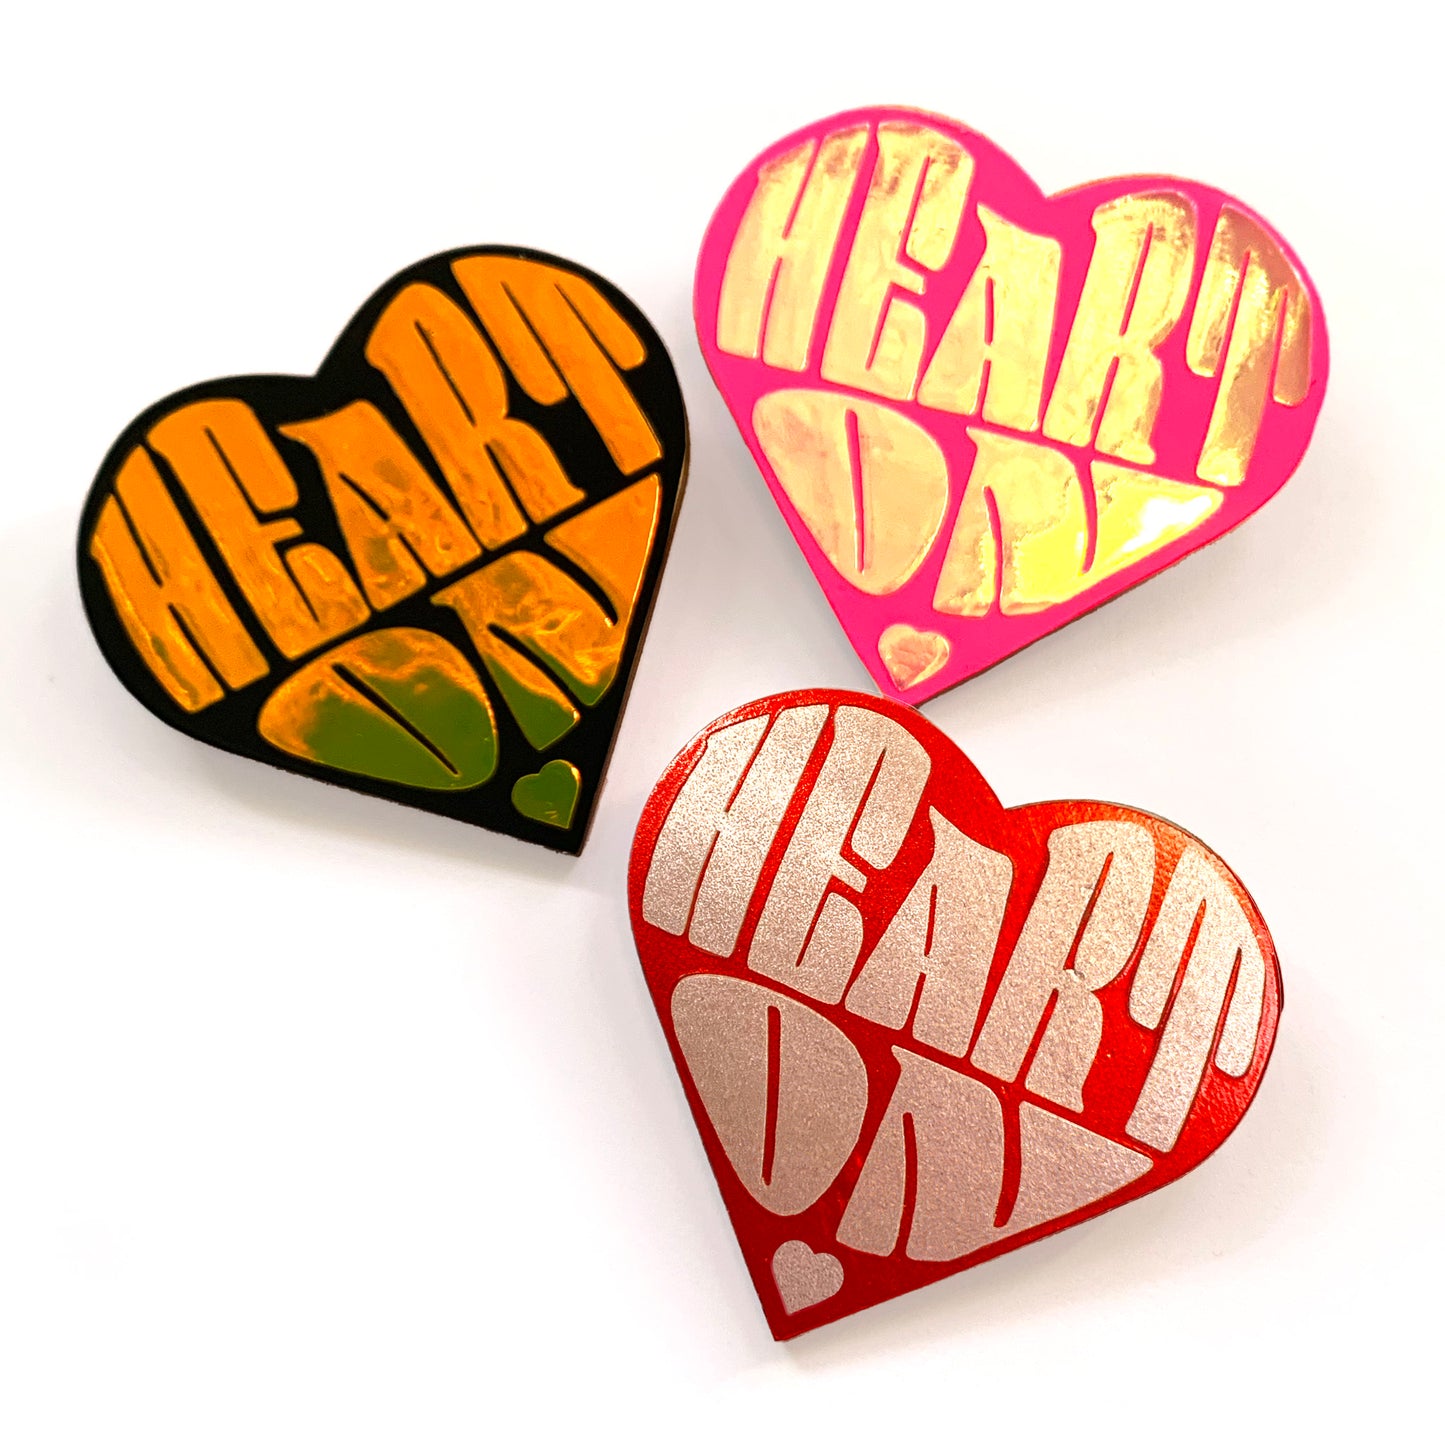 3 "Heart On" heart-shaped wood and vinyl pins - colour options holo tropical gold on matte black, holo pearl on neon pink, metallic rose gold pink on metallic red